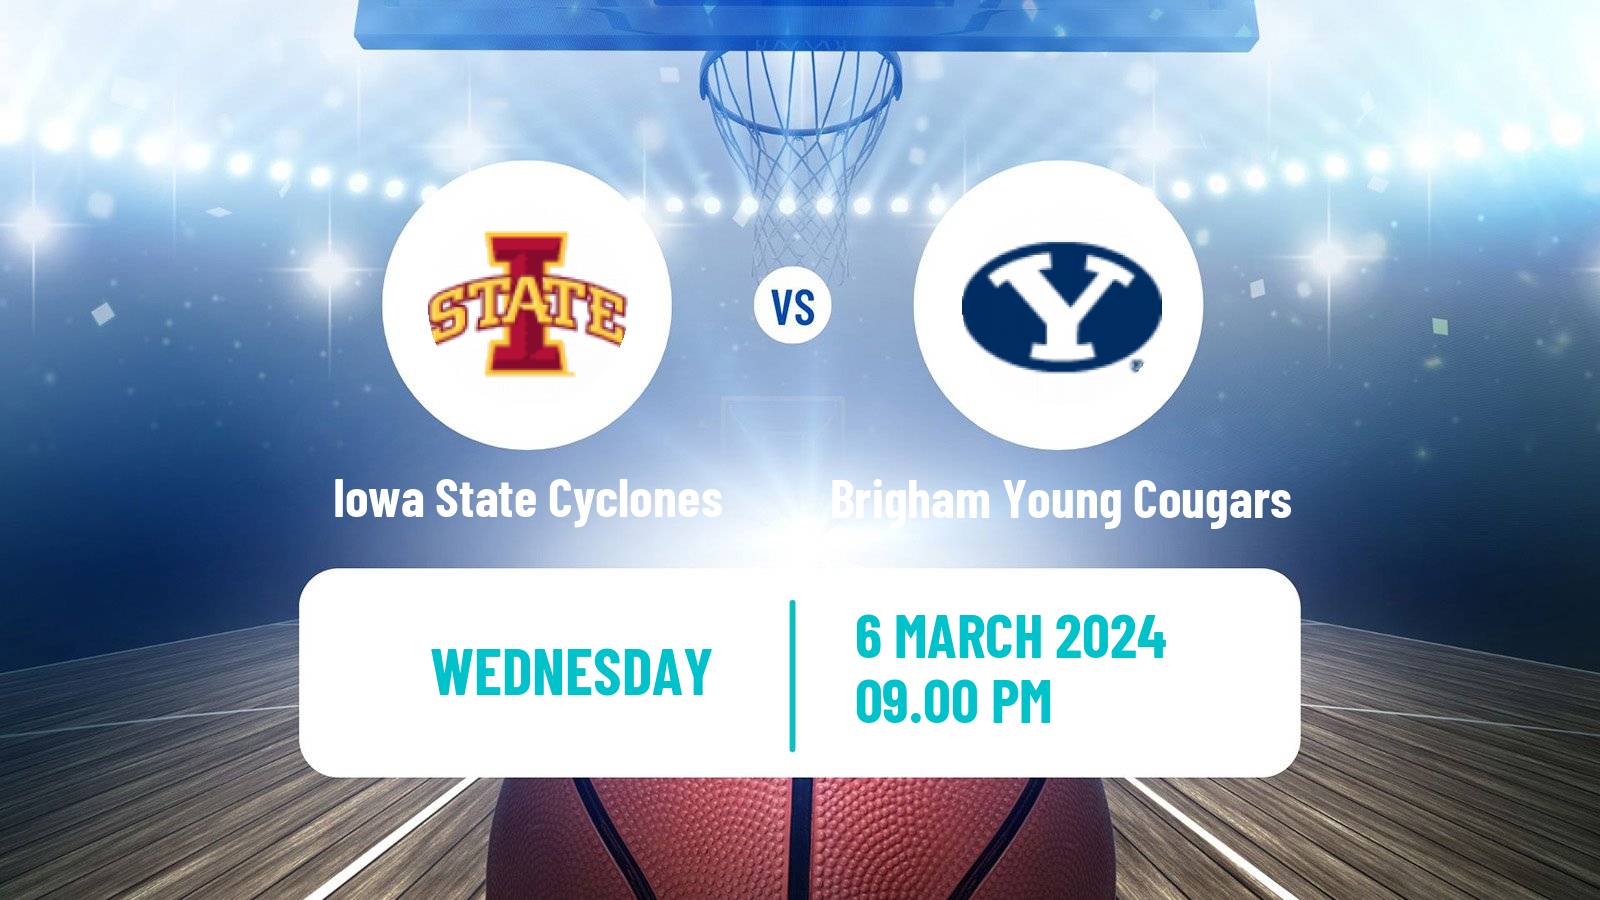 Basketball NCAA College Basketball Iowa State Cyclones - Brigham Young Cougars